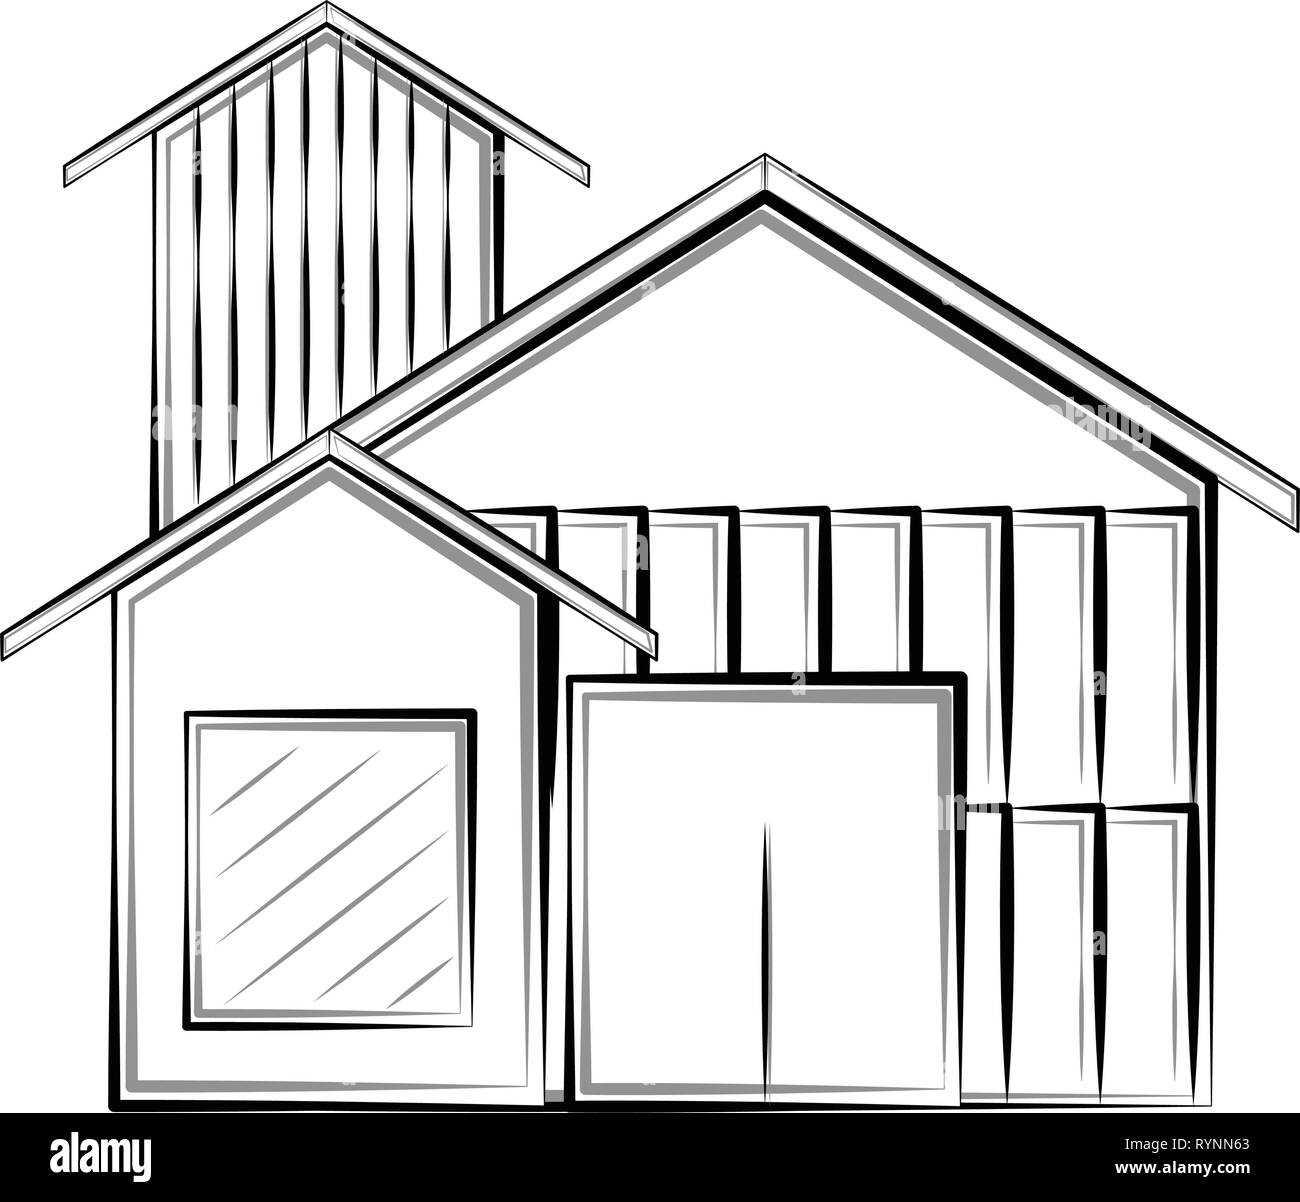 Isolated Sketch Of A Modern House Stock Vector Image Art Alamy 1280 x 720 jpeg 229 kb. https www alamy com isolated sketch of a modern house image240808123 html